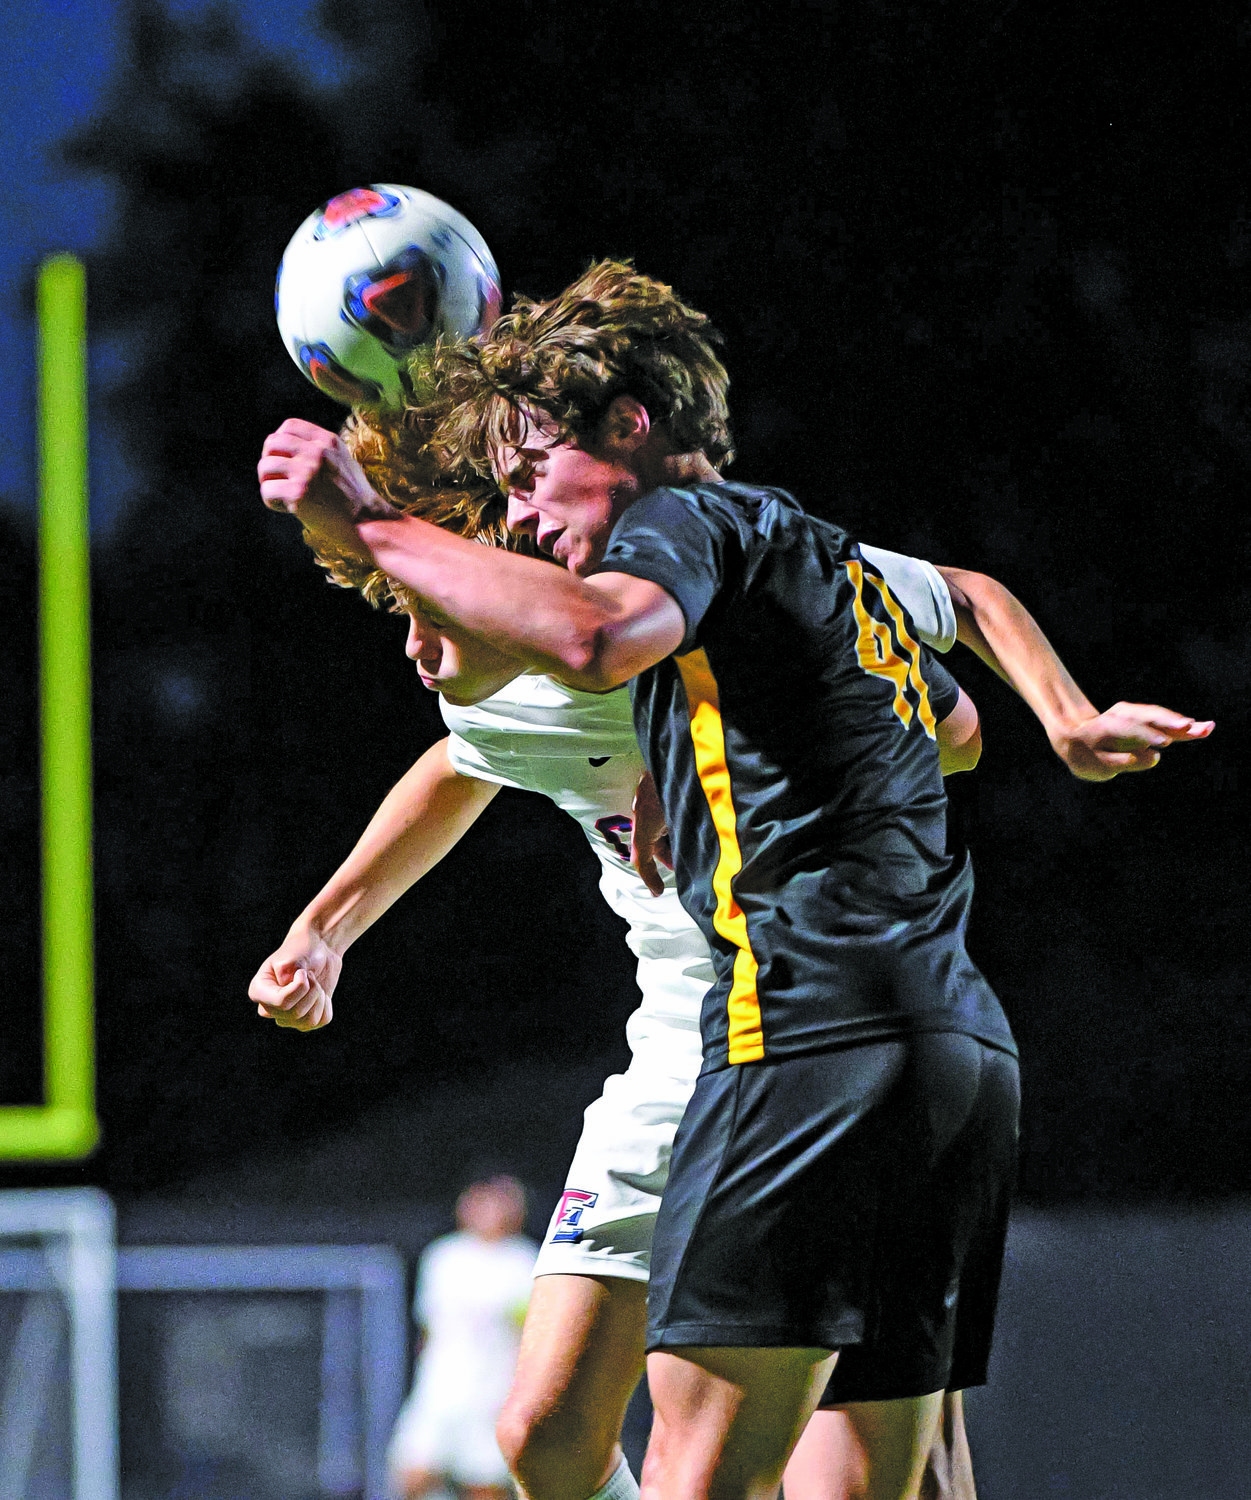 CB East’s Michael Montabana and CB West’s Joe Dowd battle for a header.